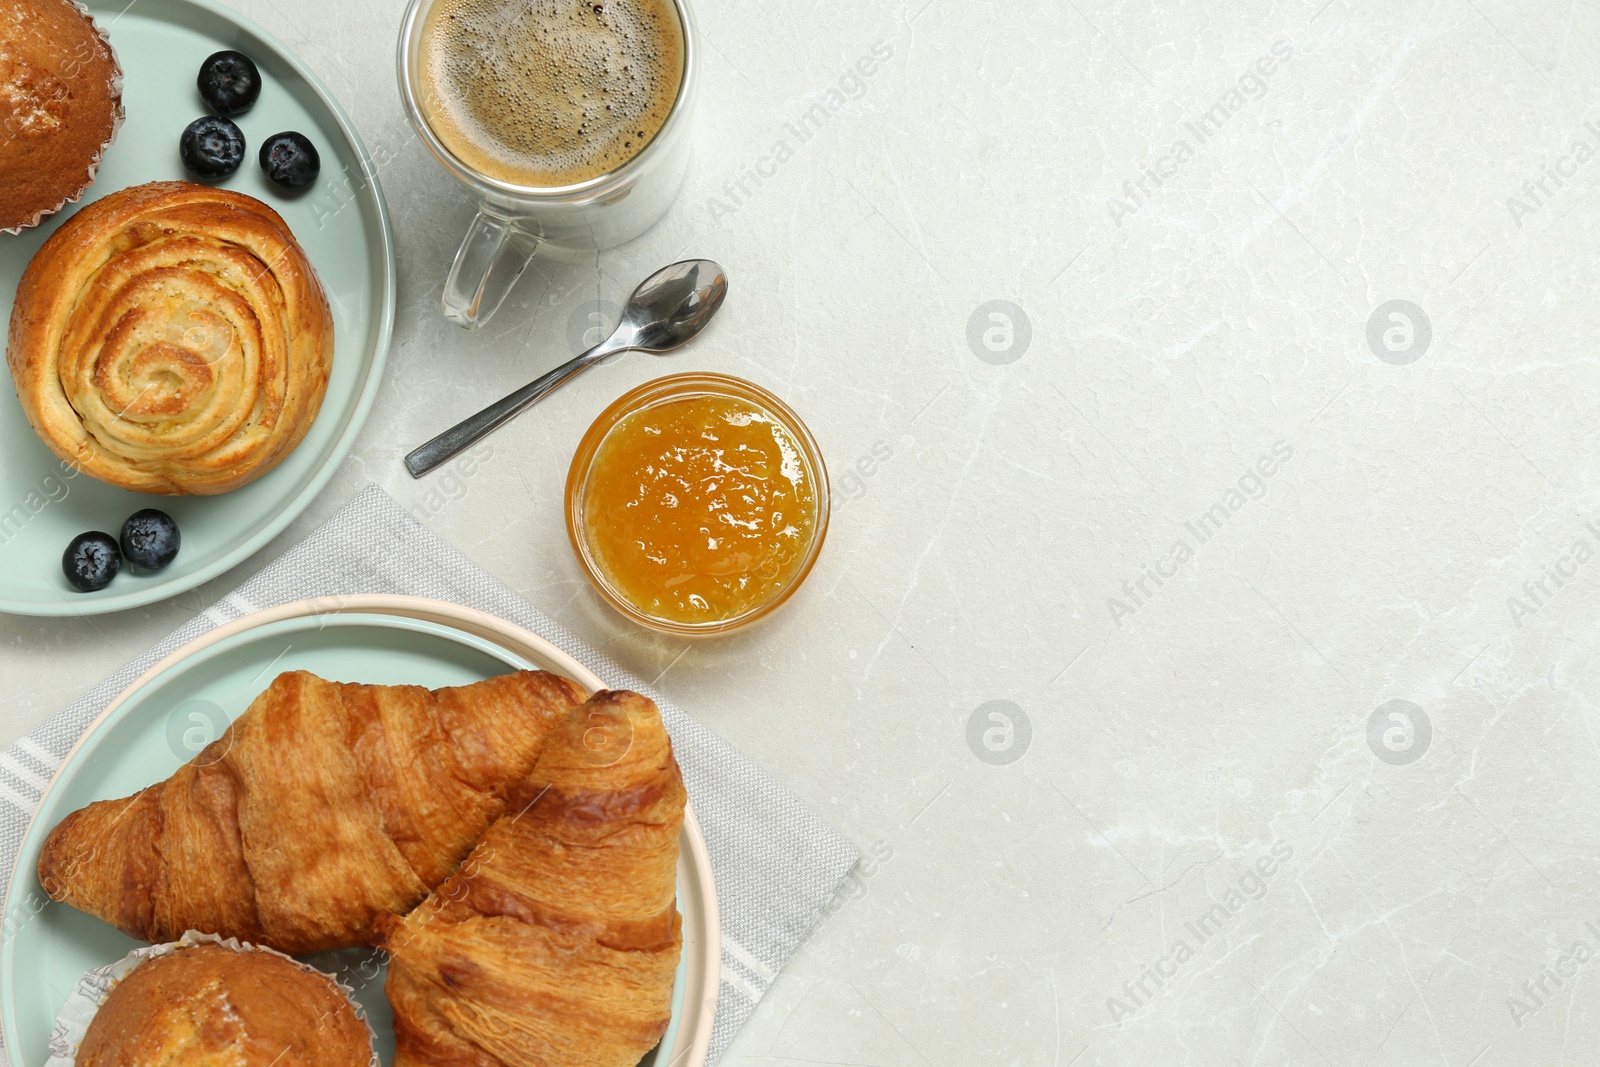 Photo of Delicious breakfast with tasty bun, croissants and coffee on white table, flat lay. Space for text